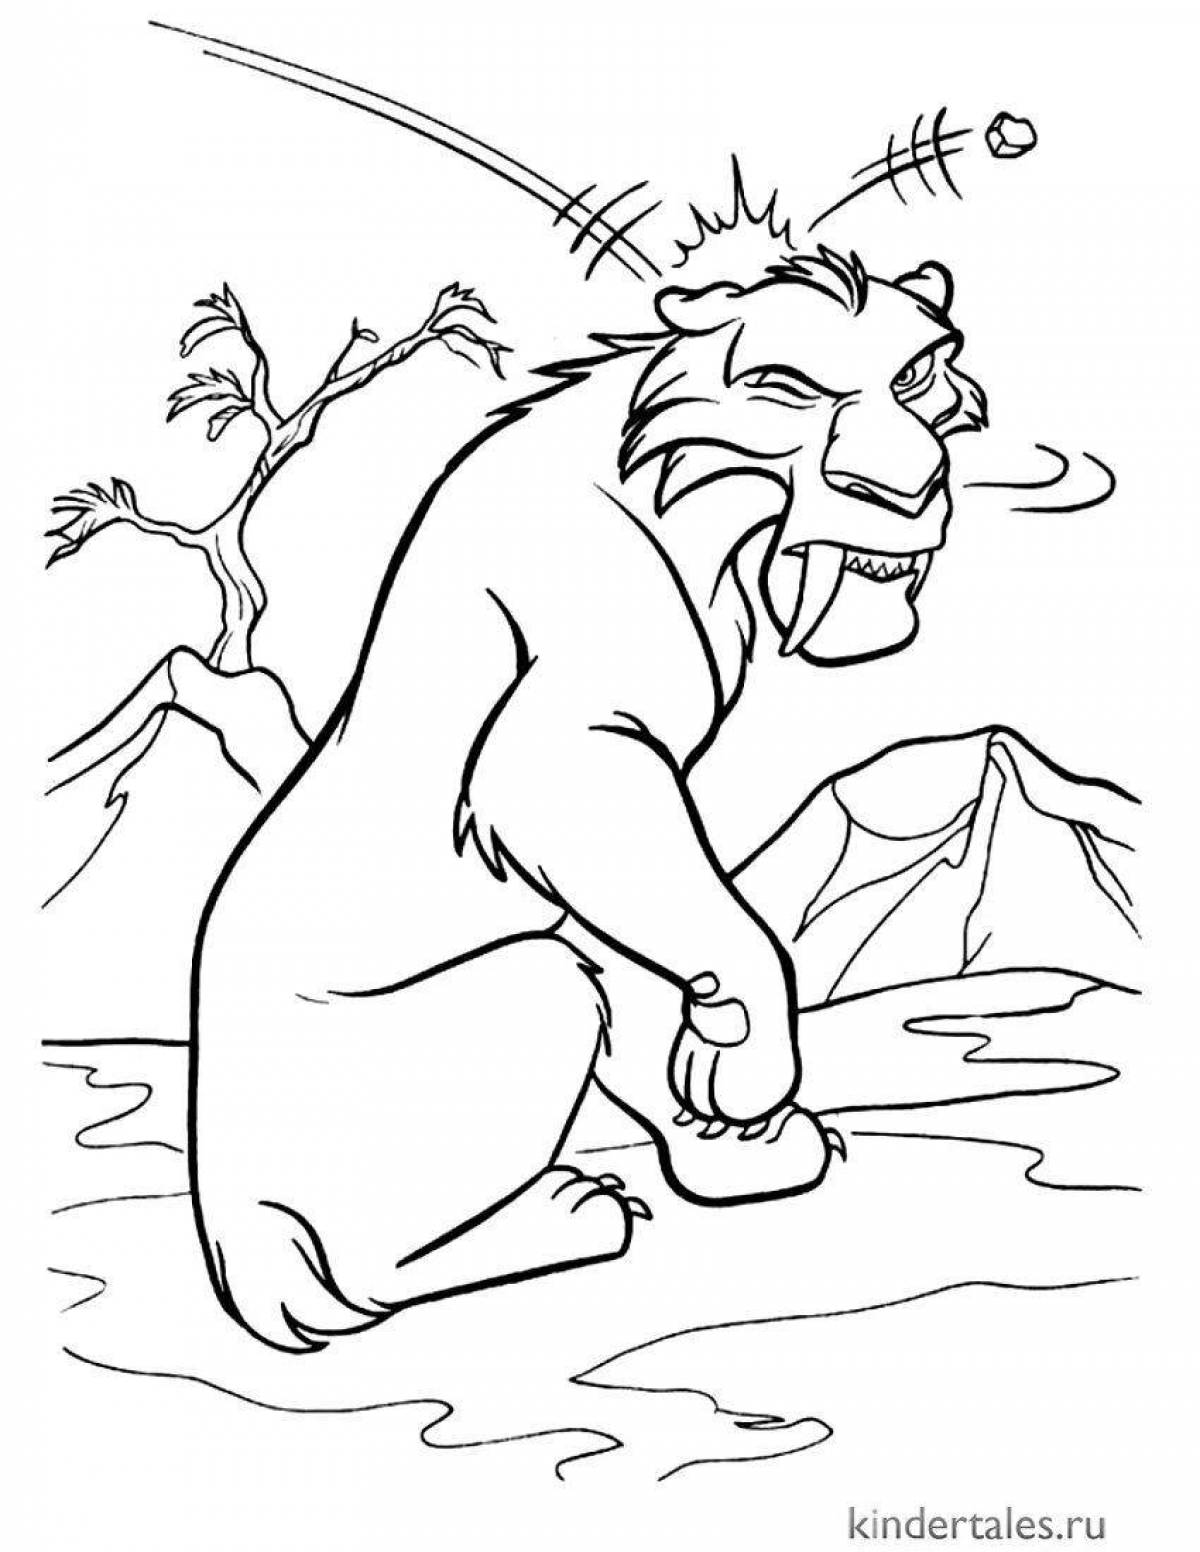 Funny saber-toothed tiger coloring pages for kids